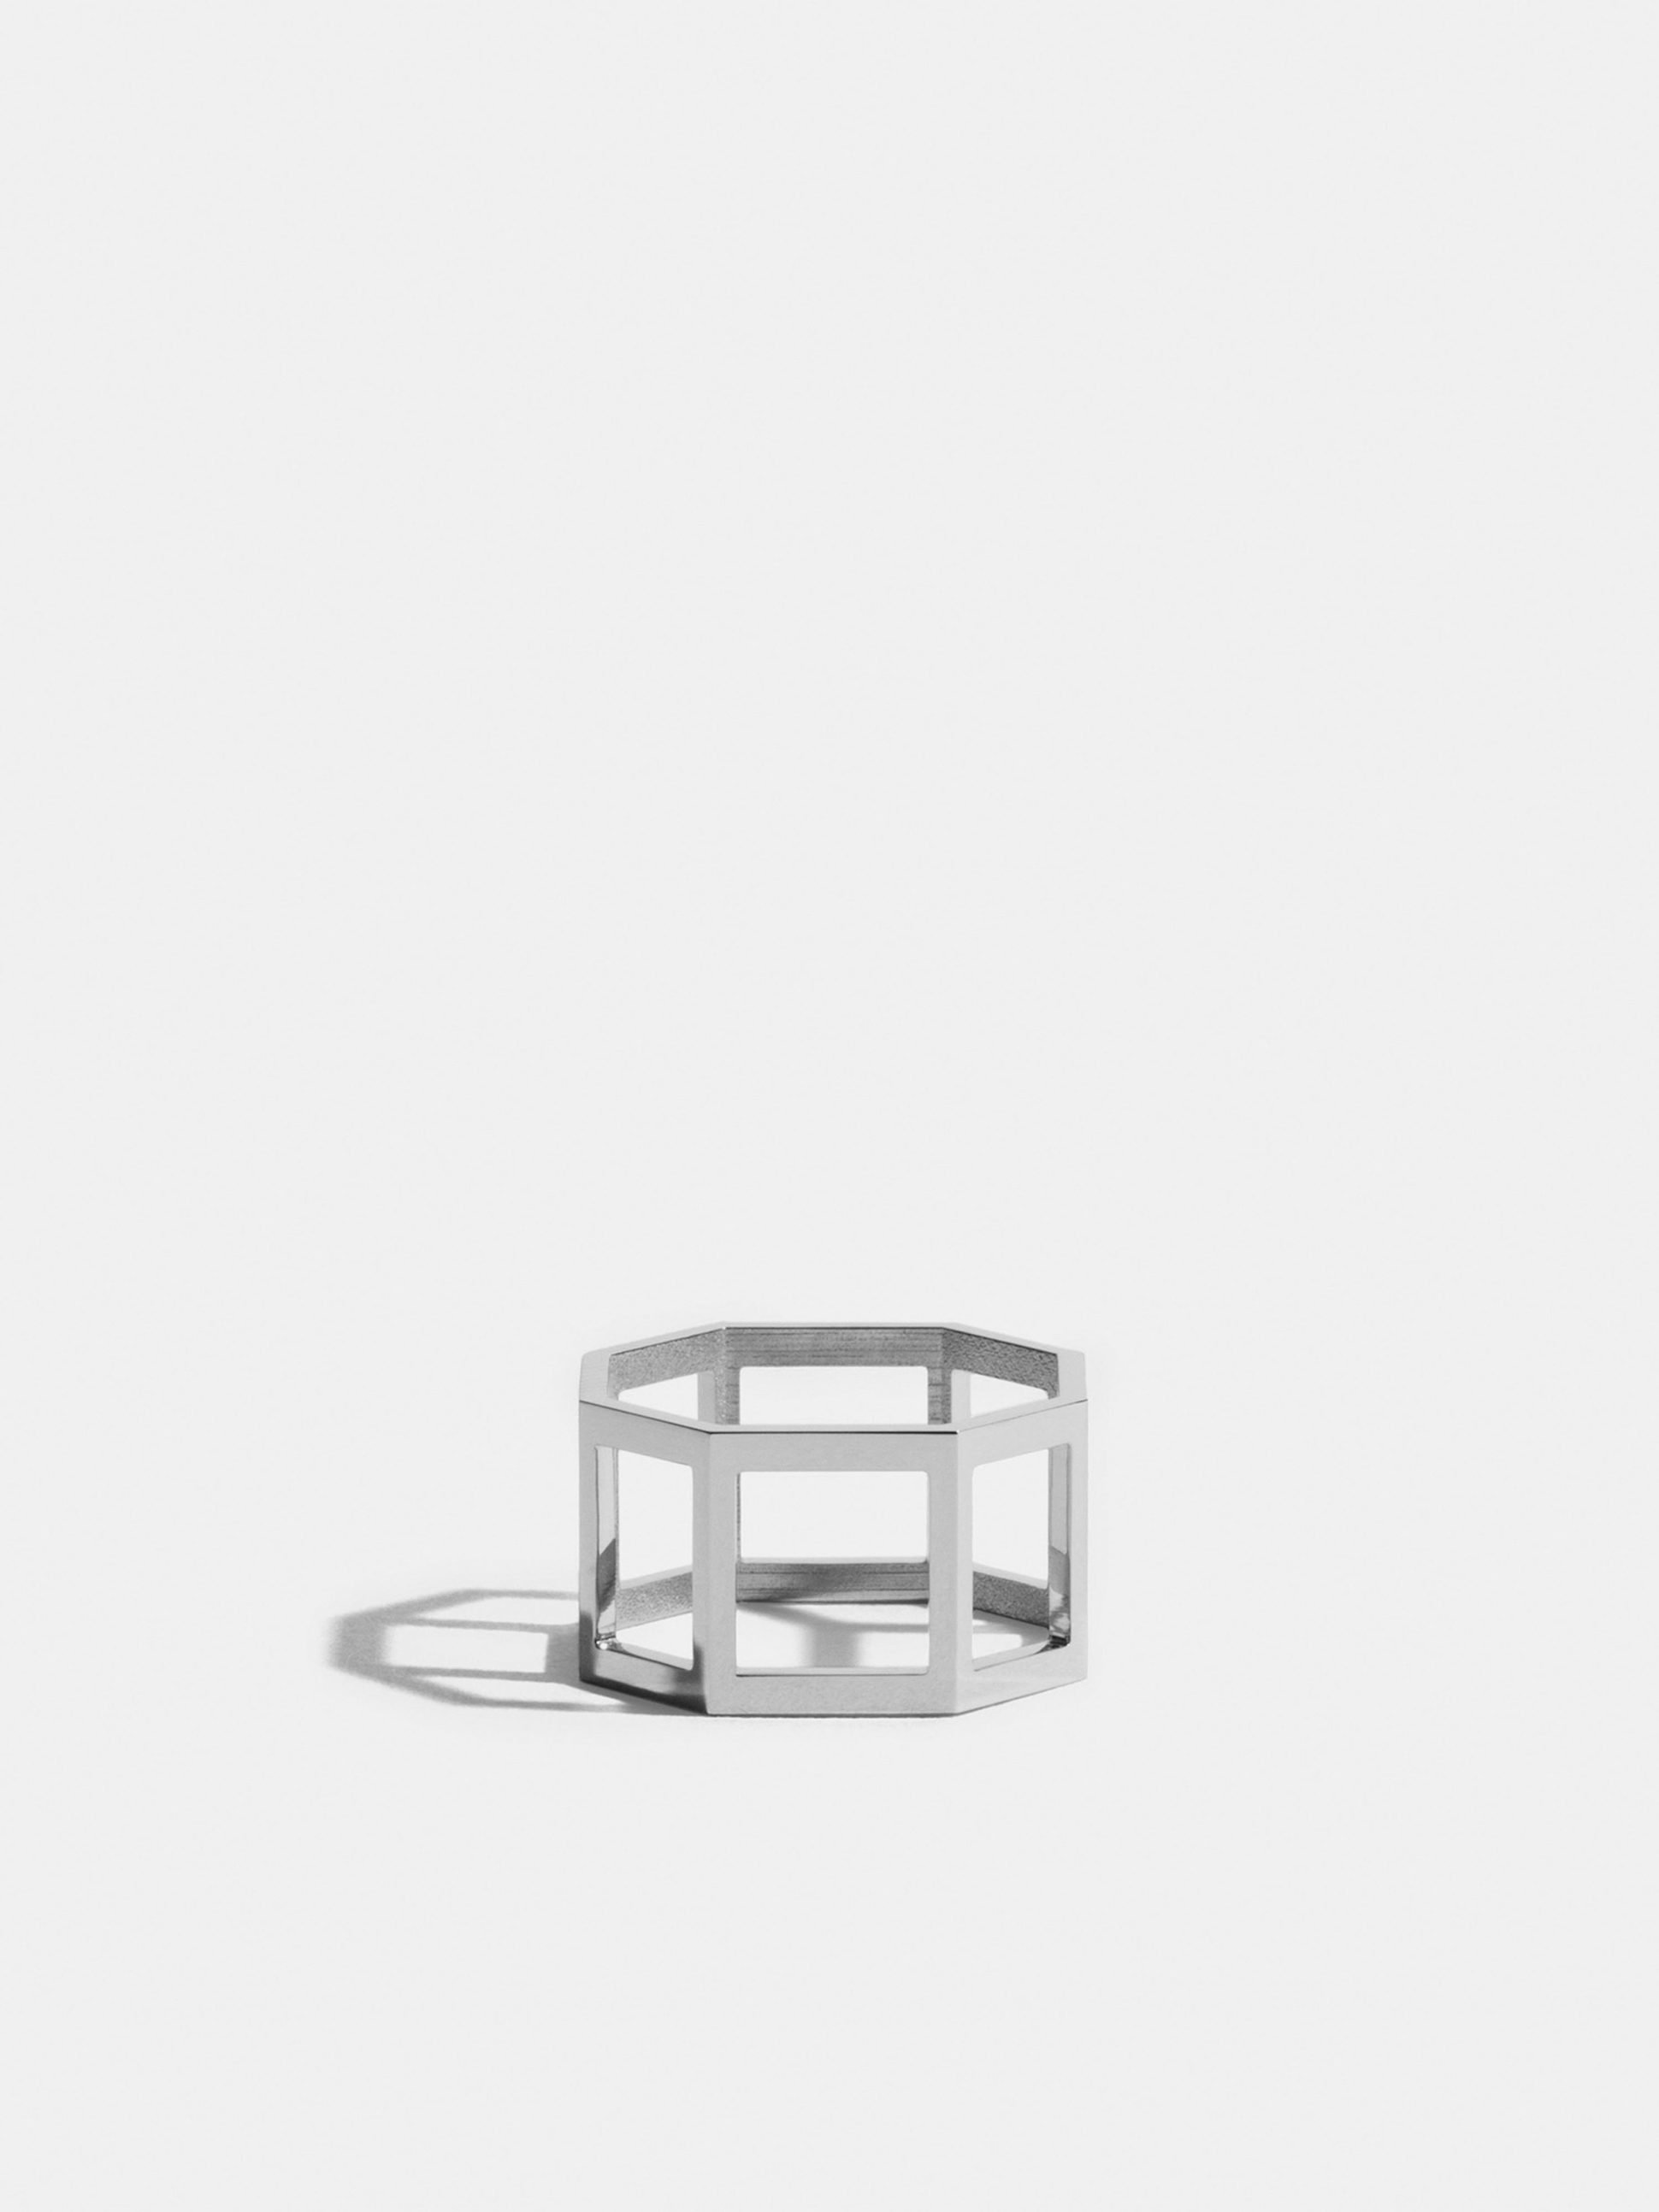 Octogone structured ring in 18k Fairmined ethical white gold (11mm)